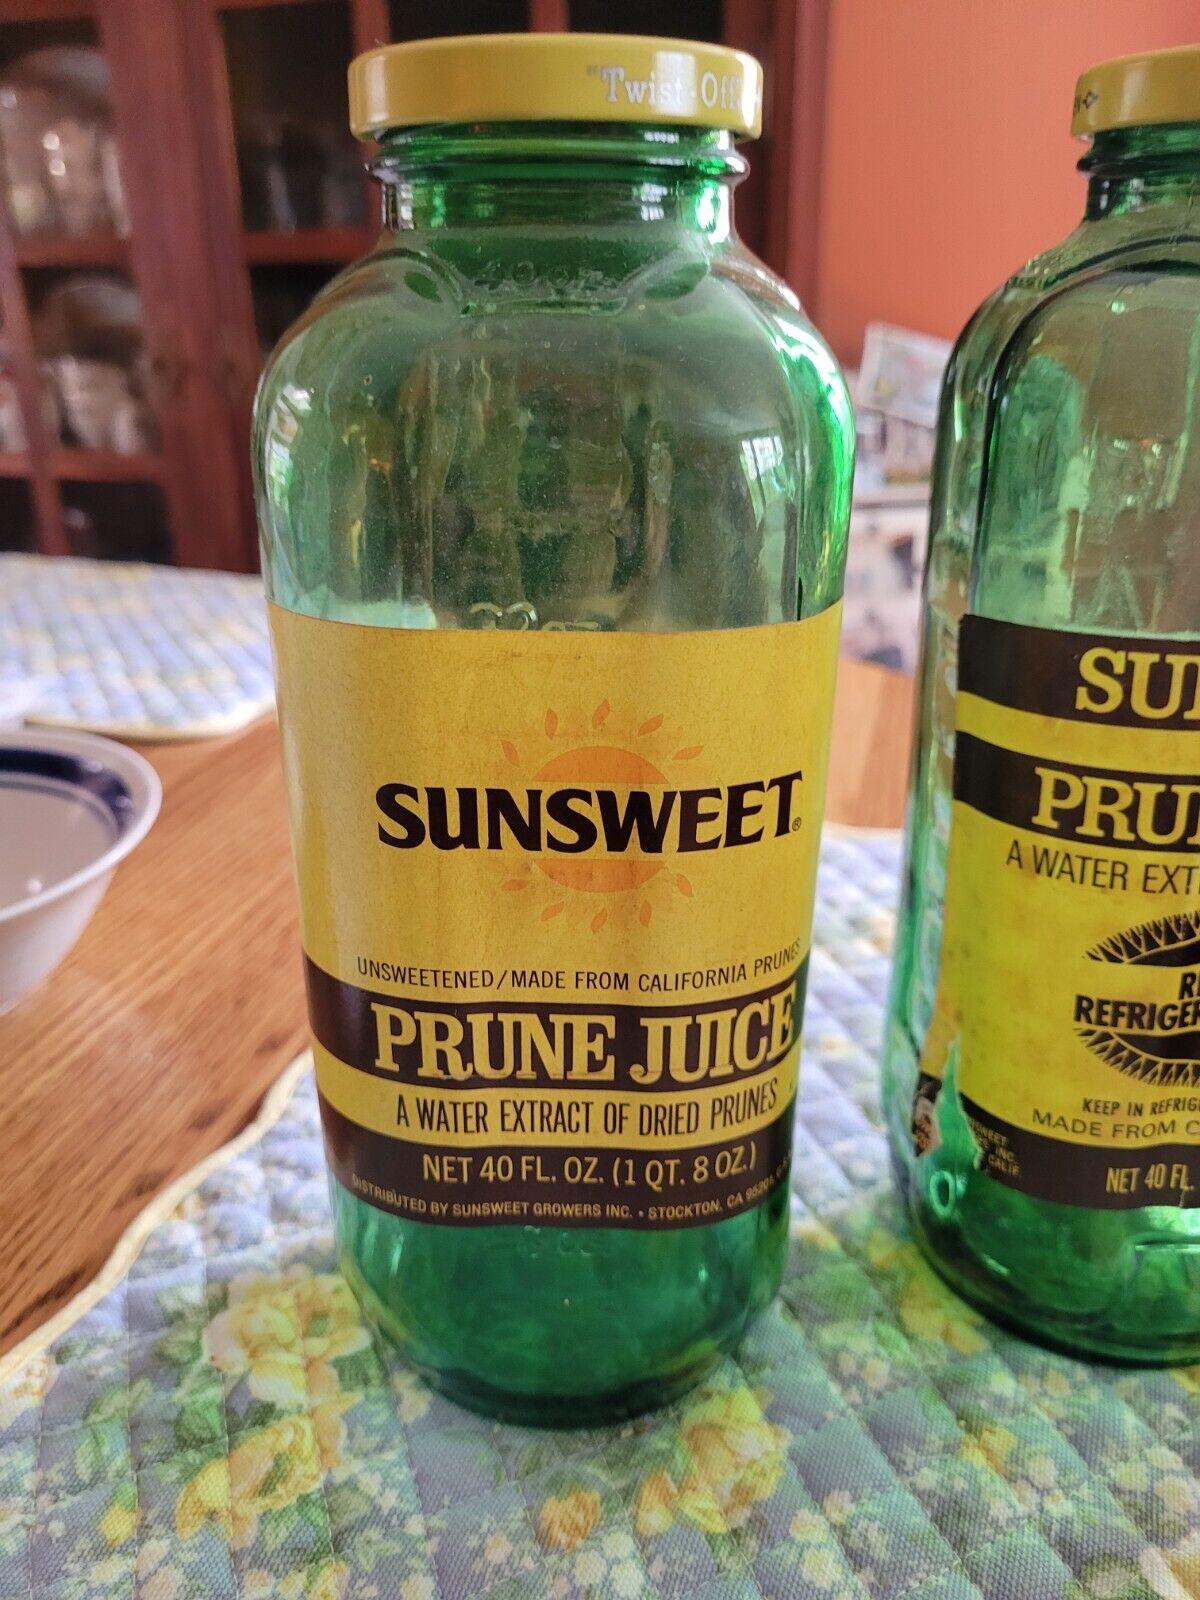 Vintage Sunsweet Bottles With Labels